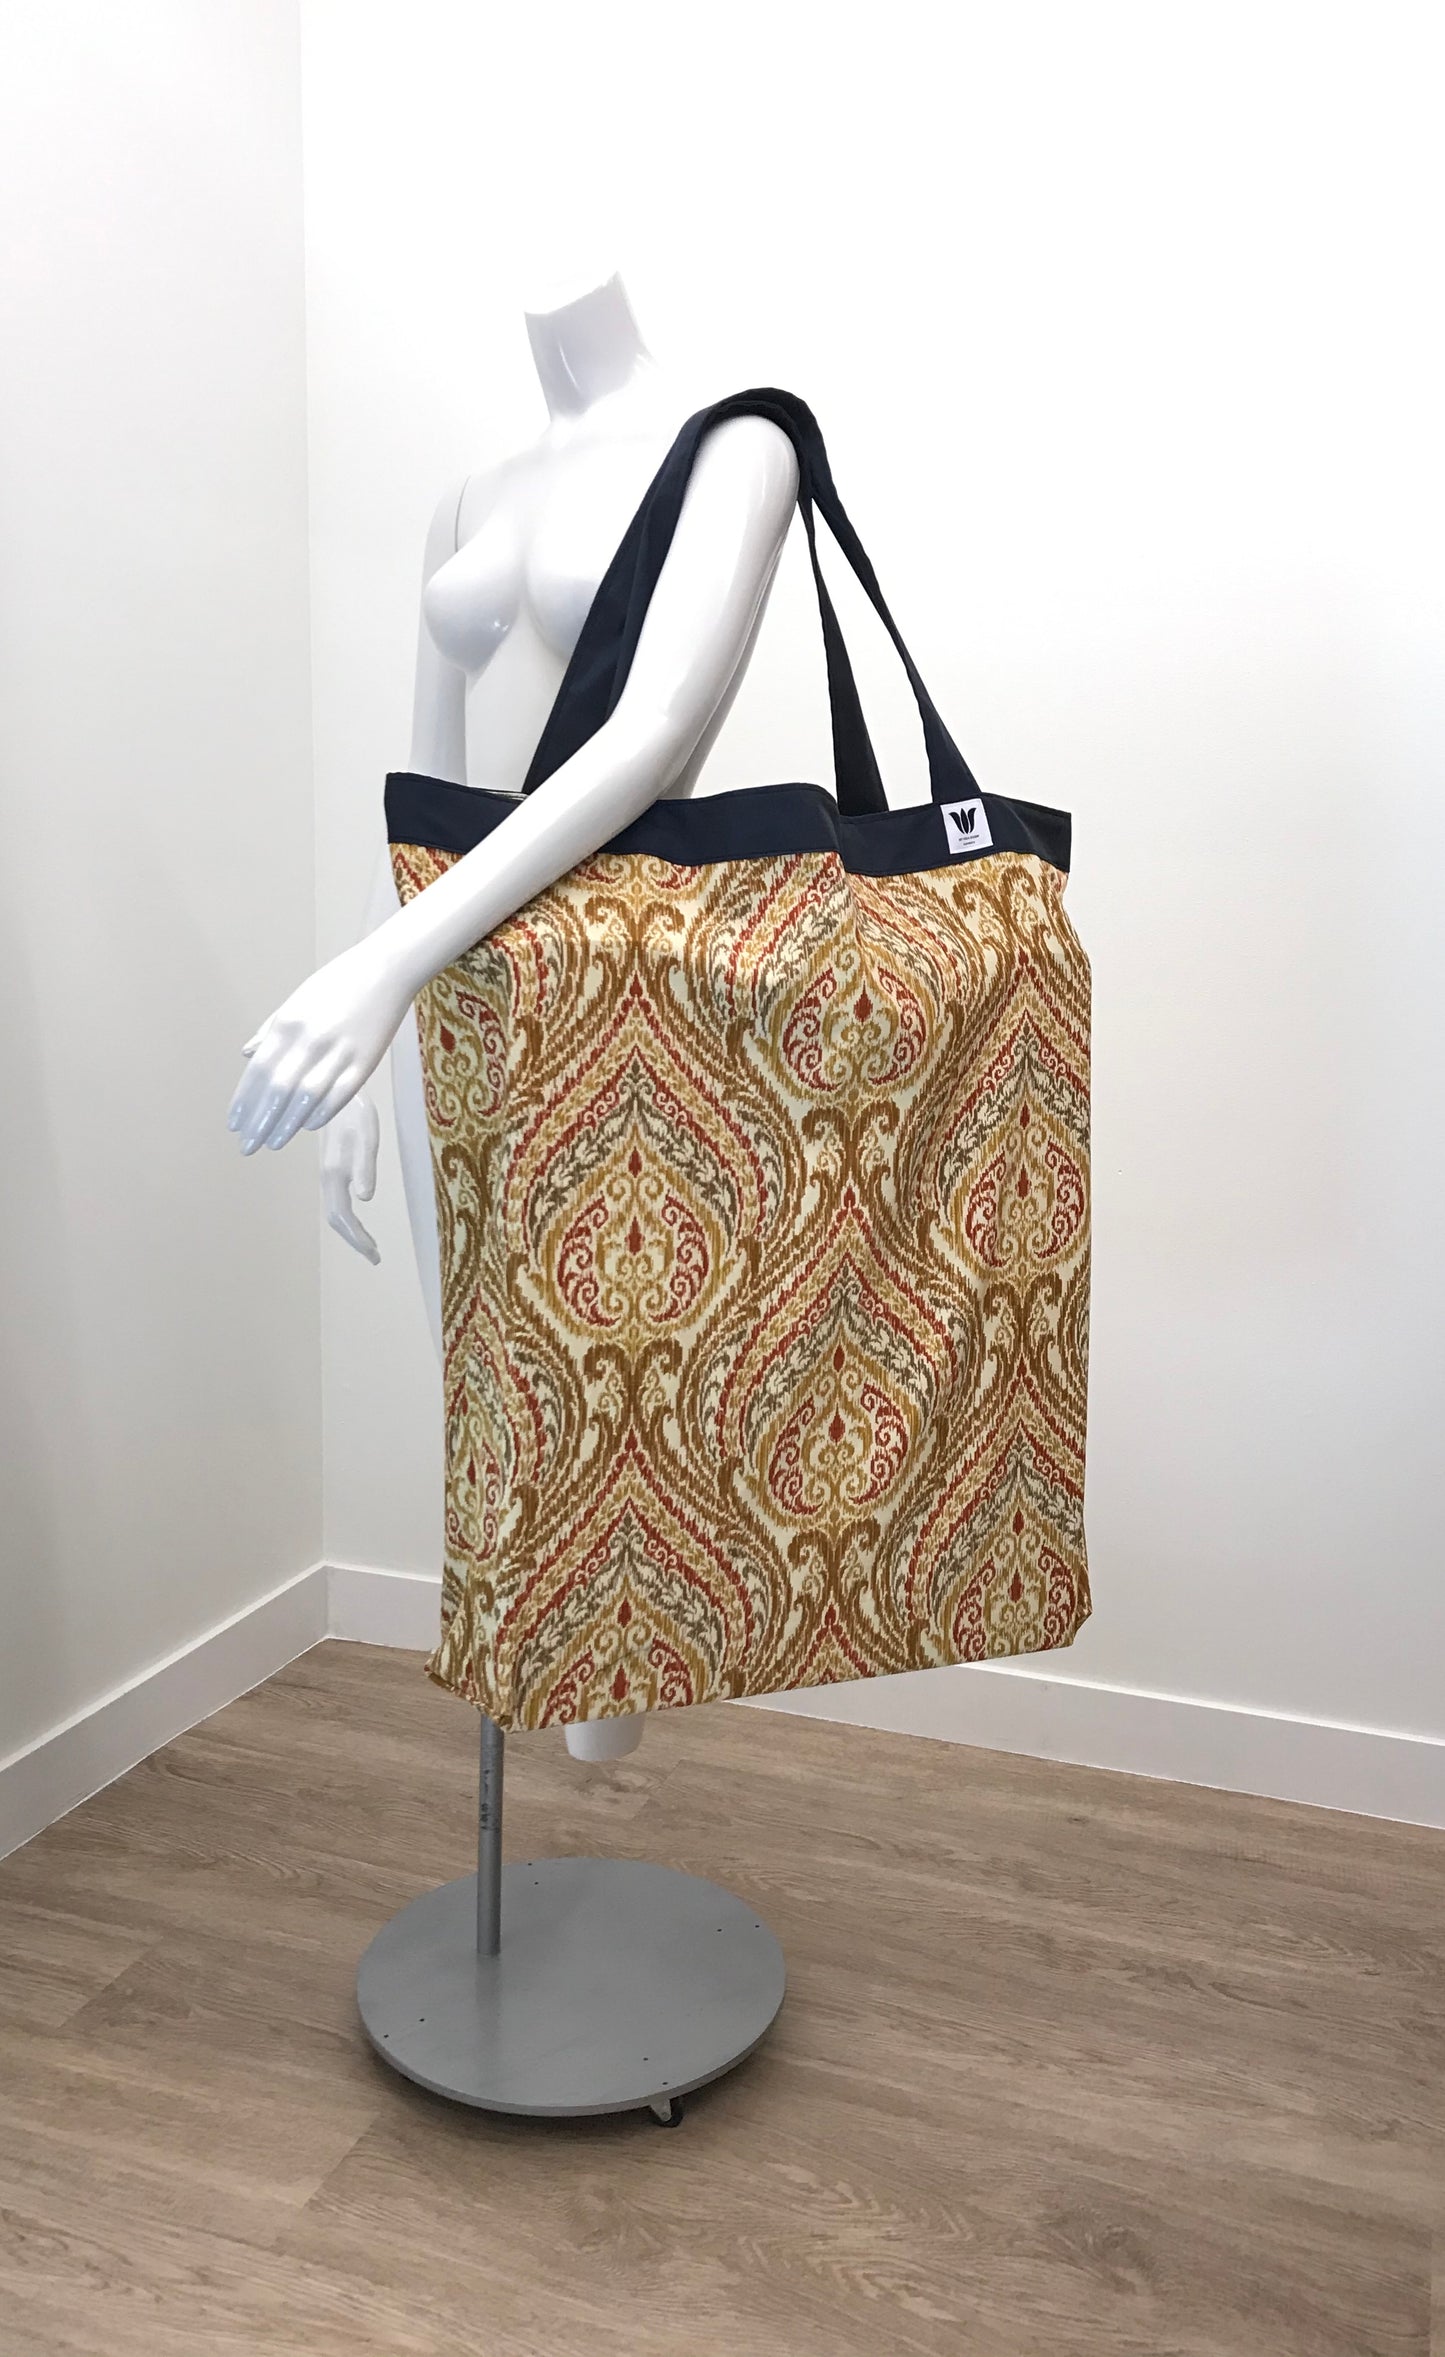 Extra Large Yoga Tote Bag in Ikat Print cotton canvas fabric to carry and or store yoga props for yoga practice. Made in Canada by My Yoga Room Elements